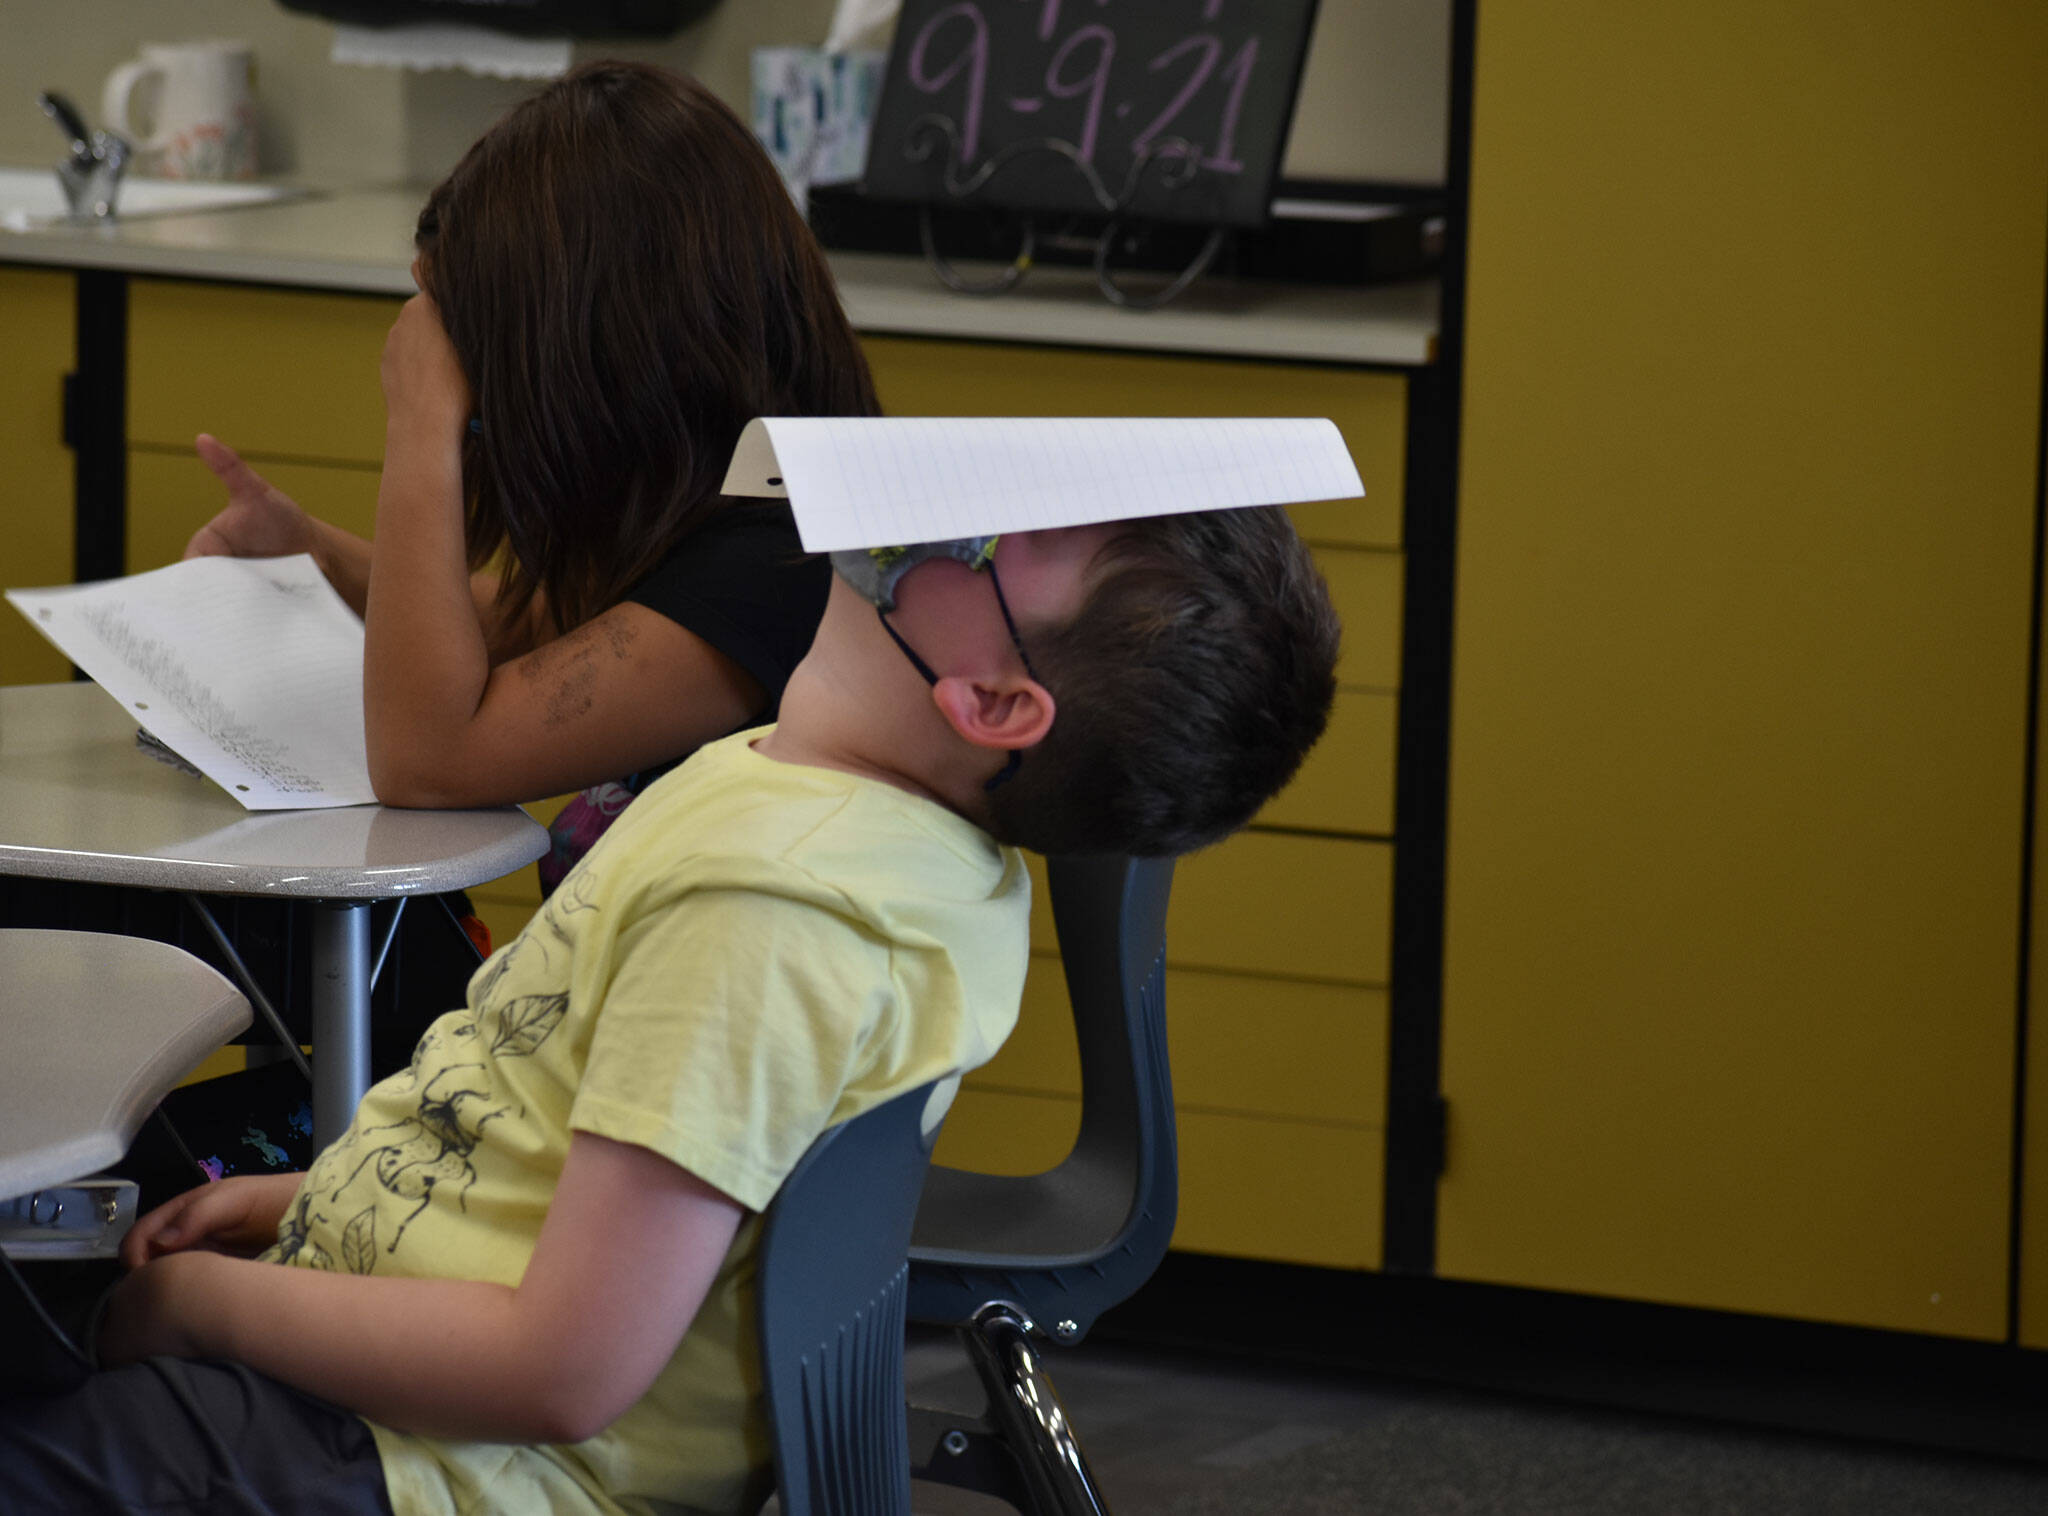 This school year and the last are different, but some things never change - like a kid’s instinct to have fun. When third grade teacher Jody Emerson asked students to place their assignments on their heads so she could collect them, one student laid back and did just so. Photo by Alex Bruell